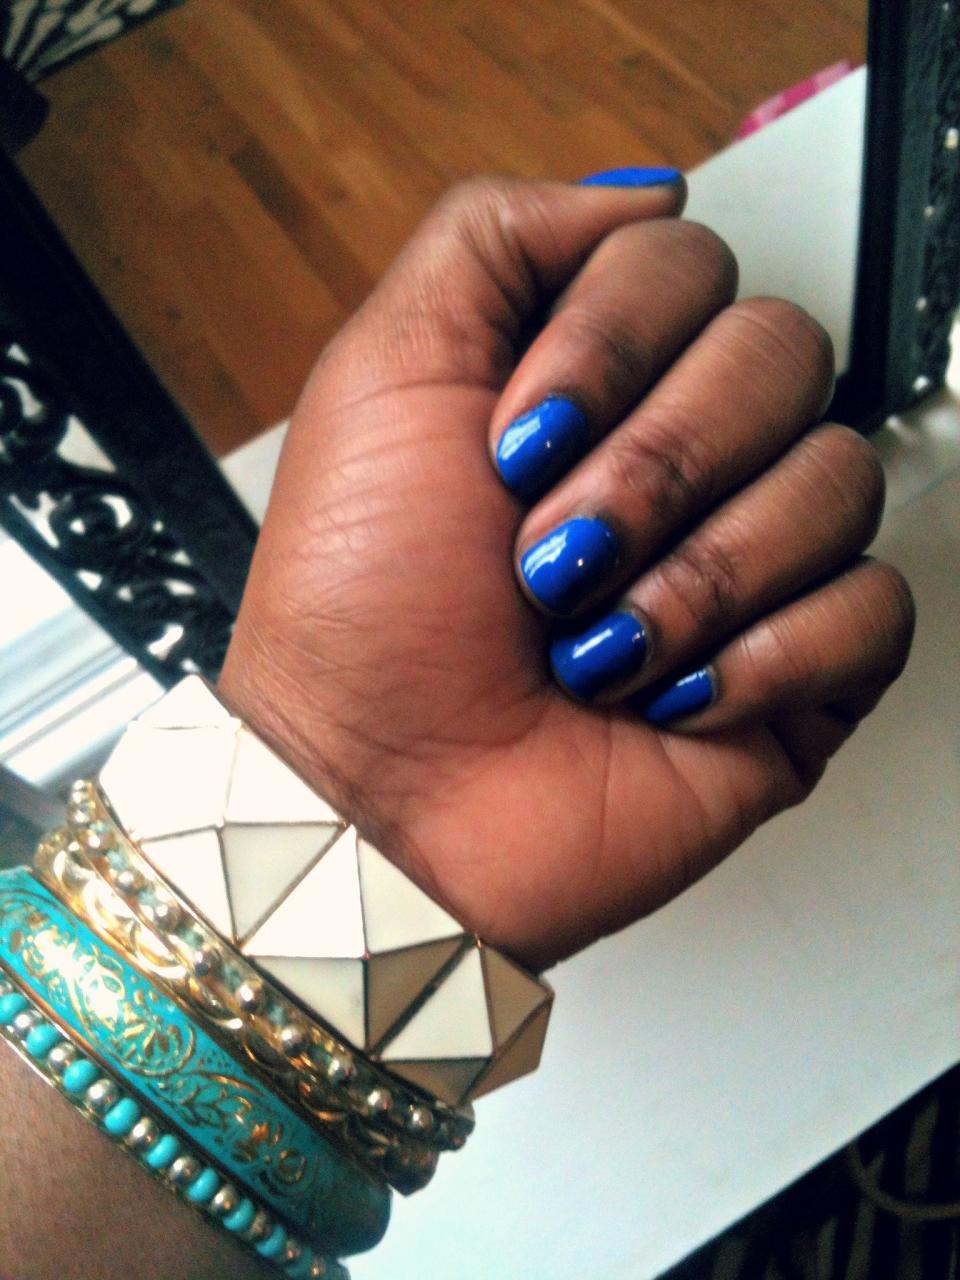 "It's a really rich royal blue perfect for any season." - Christina Brown of <a href="http://www.lovebrownsugar.com/">Love Brown Sugar</a>